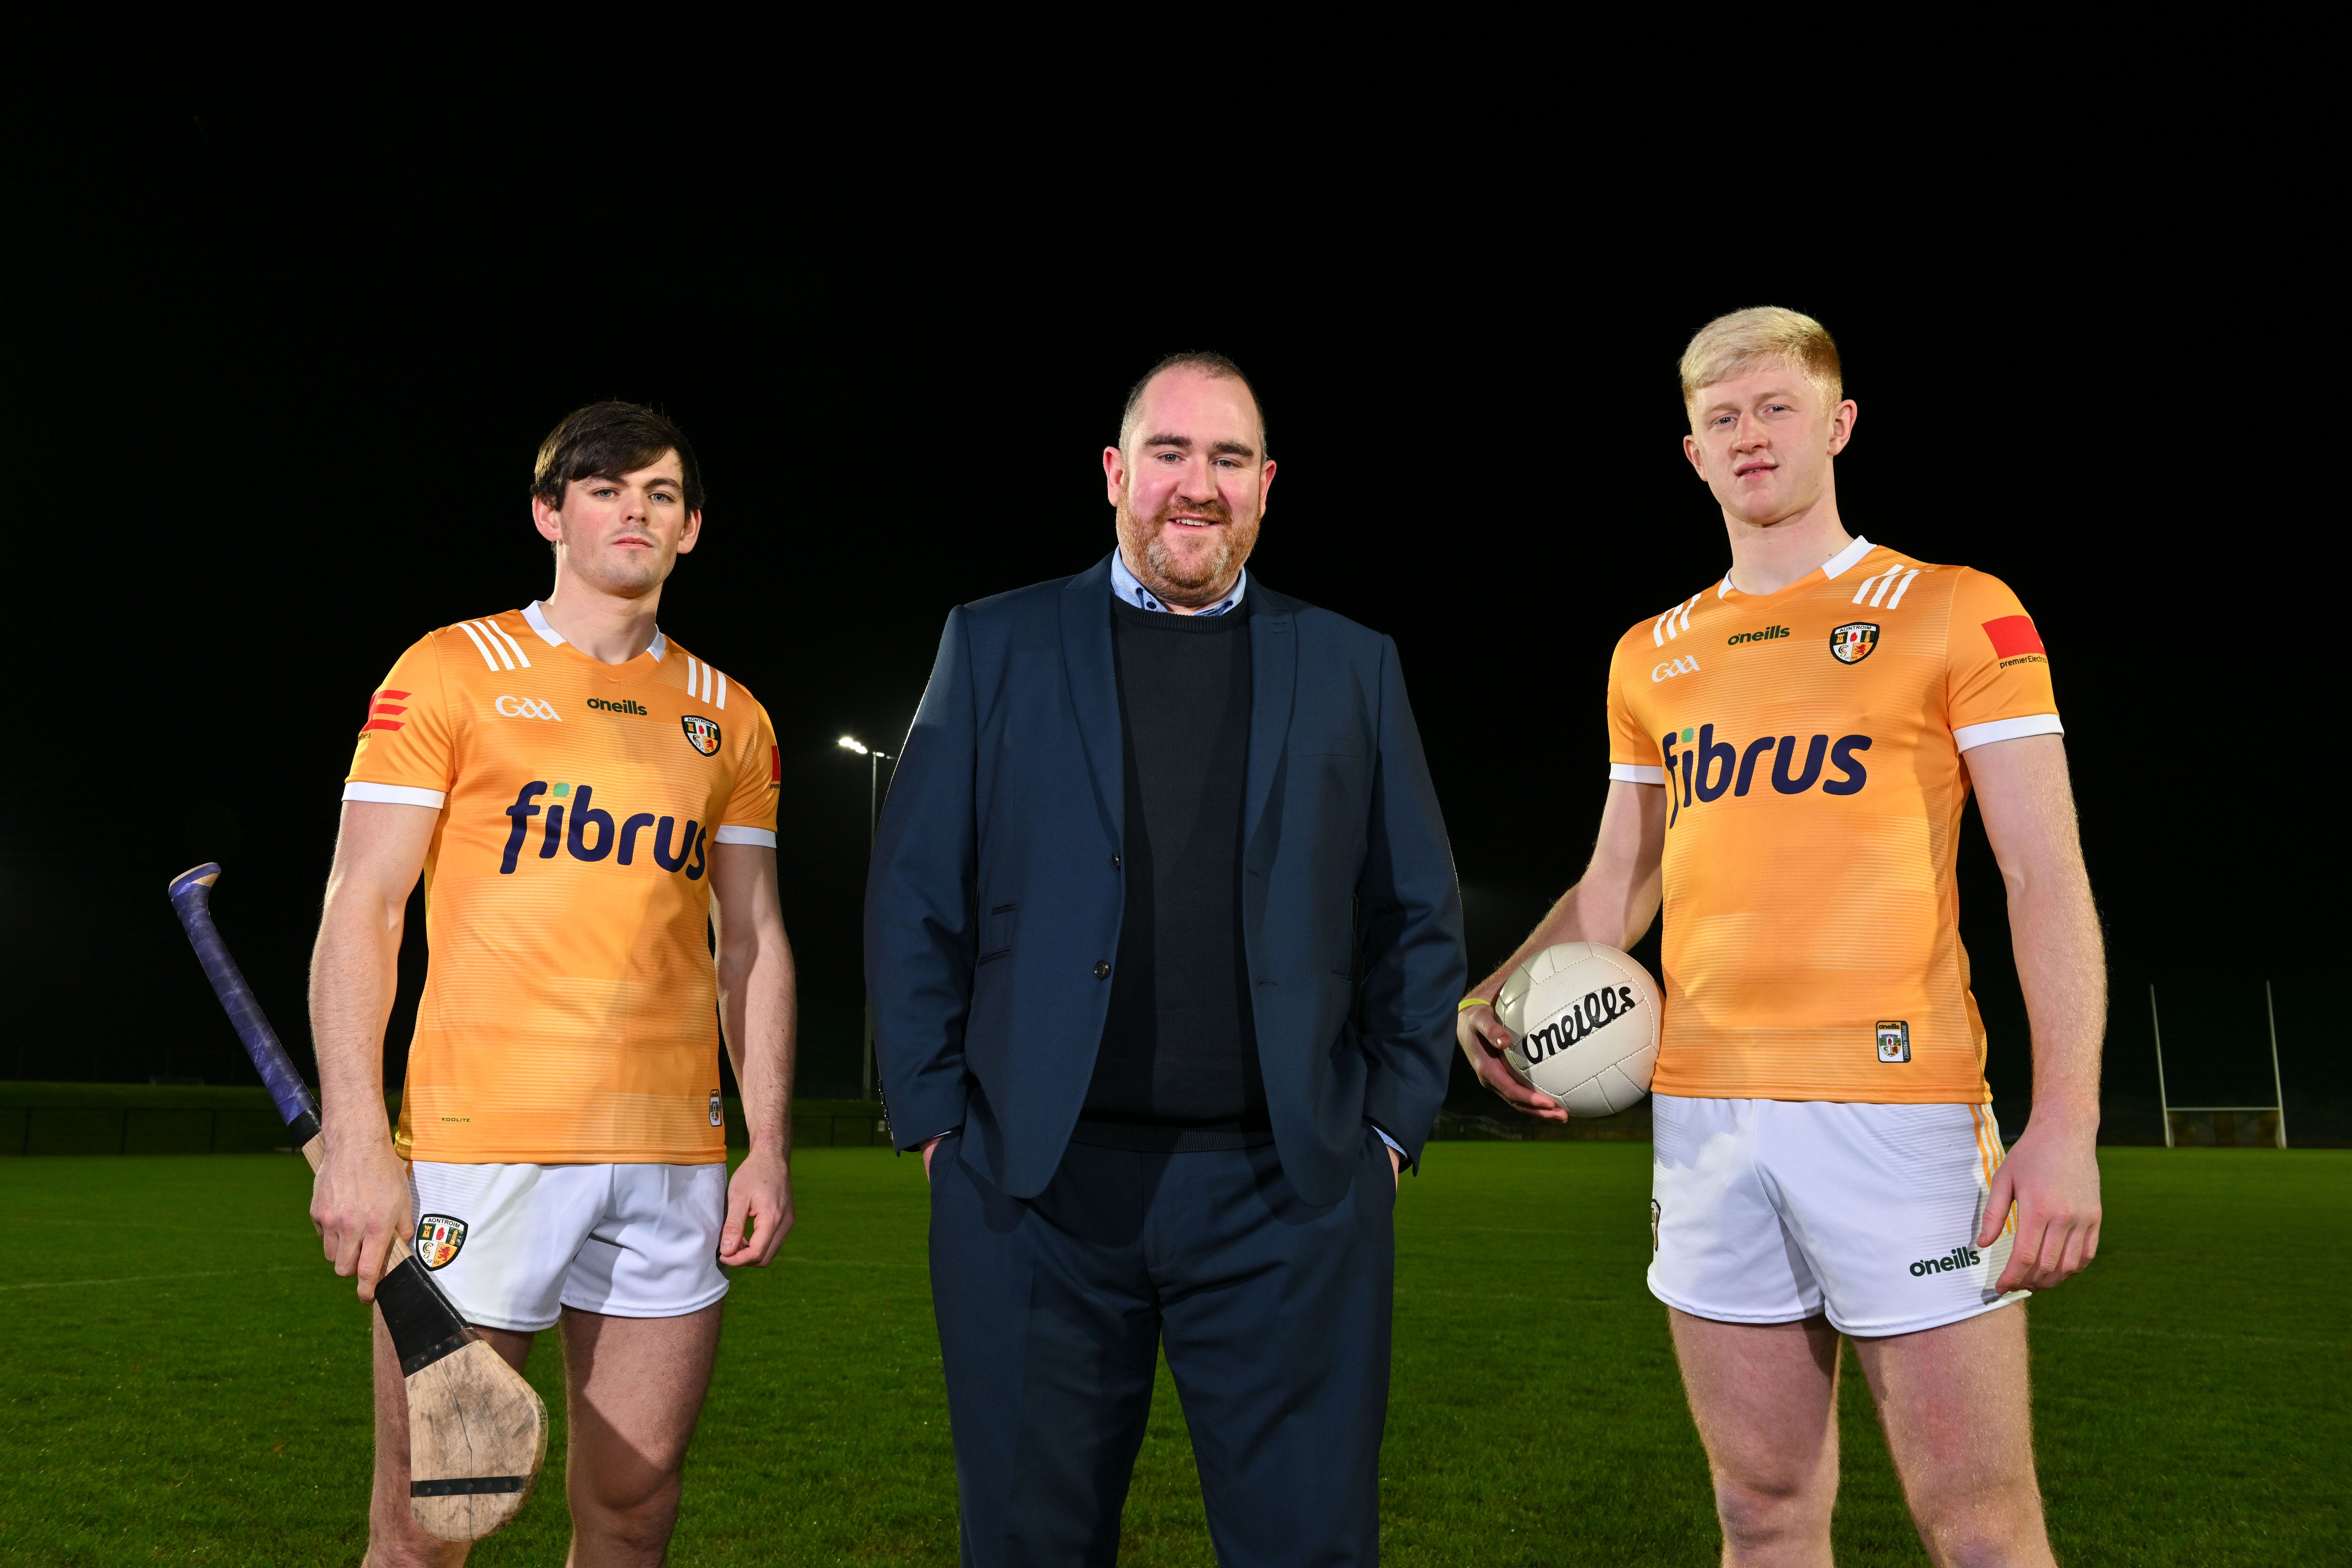 Fibrus has announced a new five-year sponsorship deal with Antrim GAA. The full fibre broadband provider’s chief executive Dominic Kearns (centre) is joined by Antrim GAA’s Gerard Walsh (left) and Pat Shivers (right)